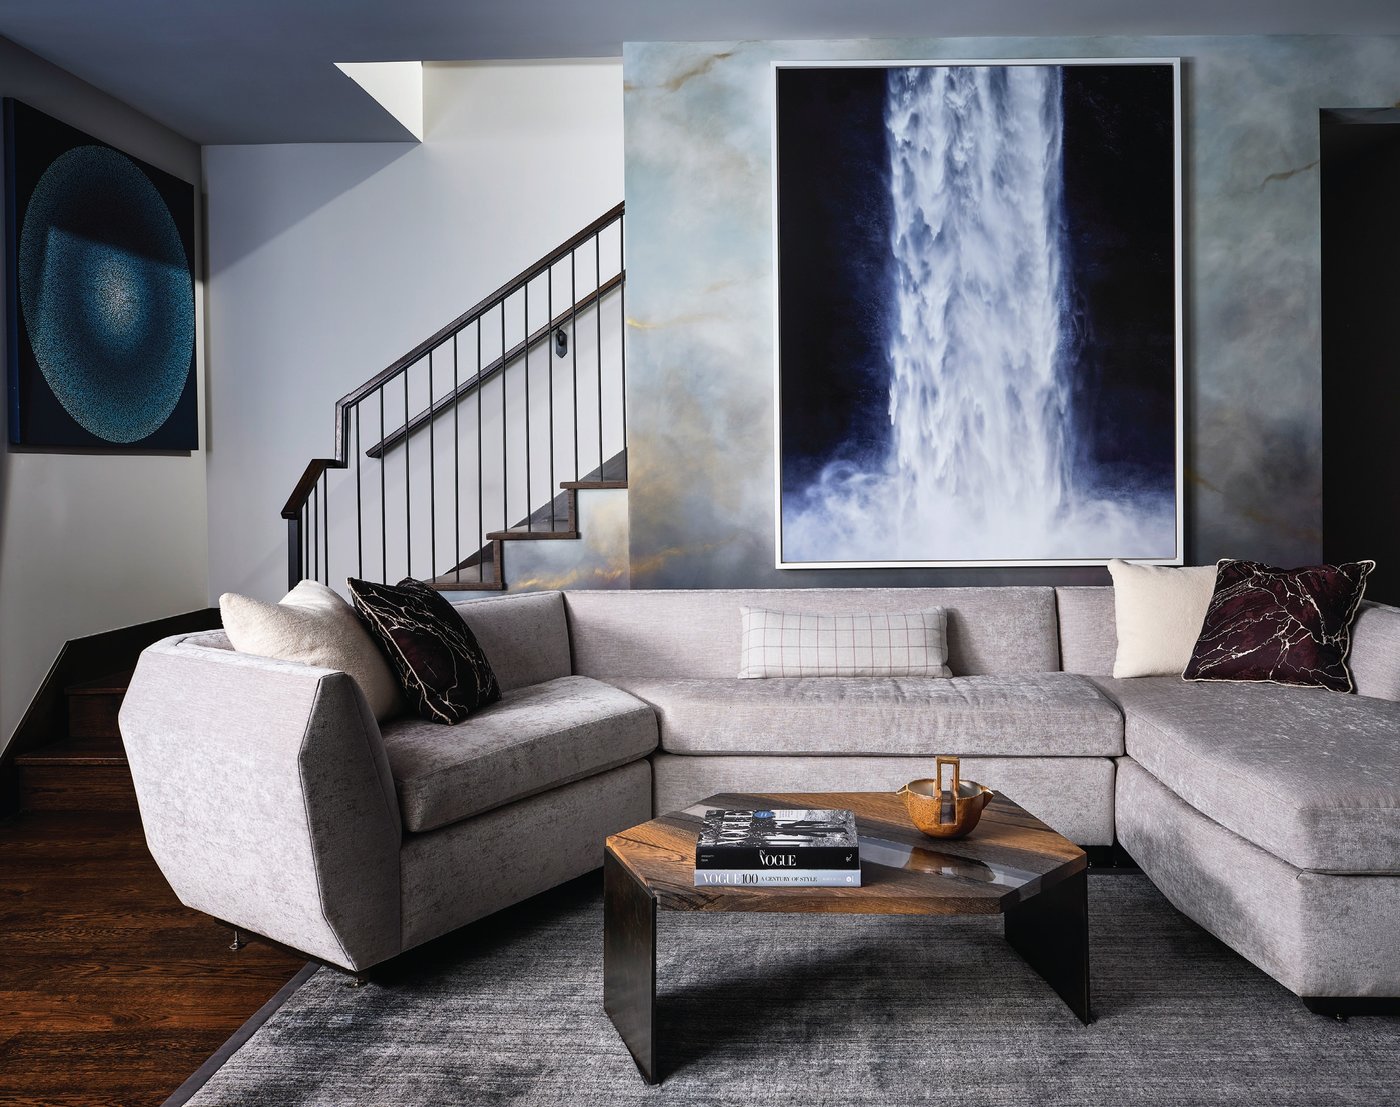 Artworks by Jonathan Smith (above the custom sofa) and A.J. Oishi bring an ethereal spirit to the downstairs media room. The rug is from Stark. PHOTOGRAPHED BY BRAD KNIPSTEIN